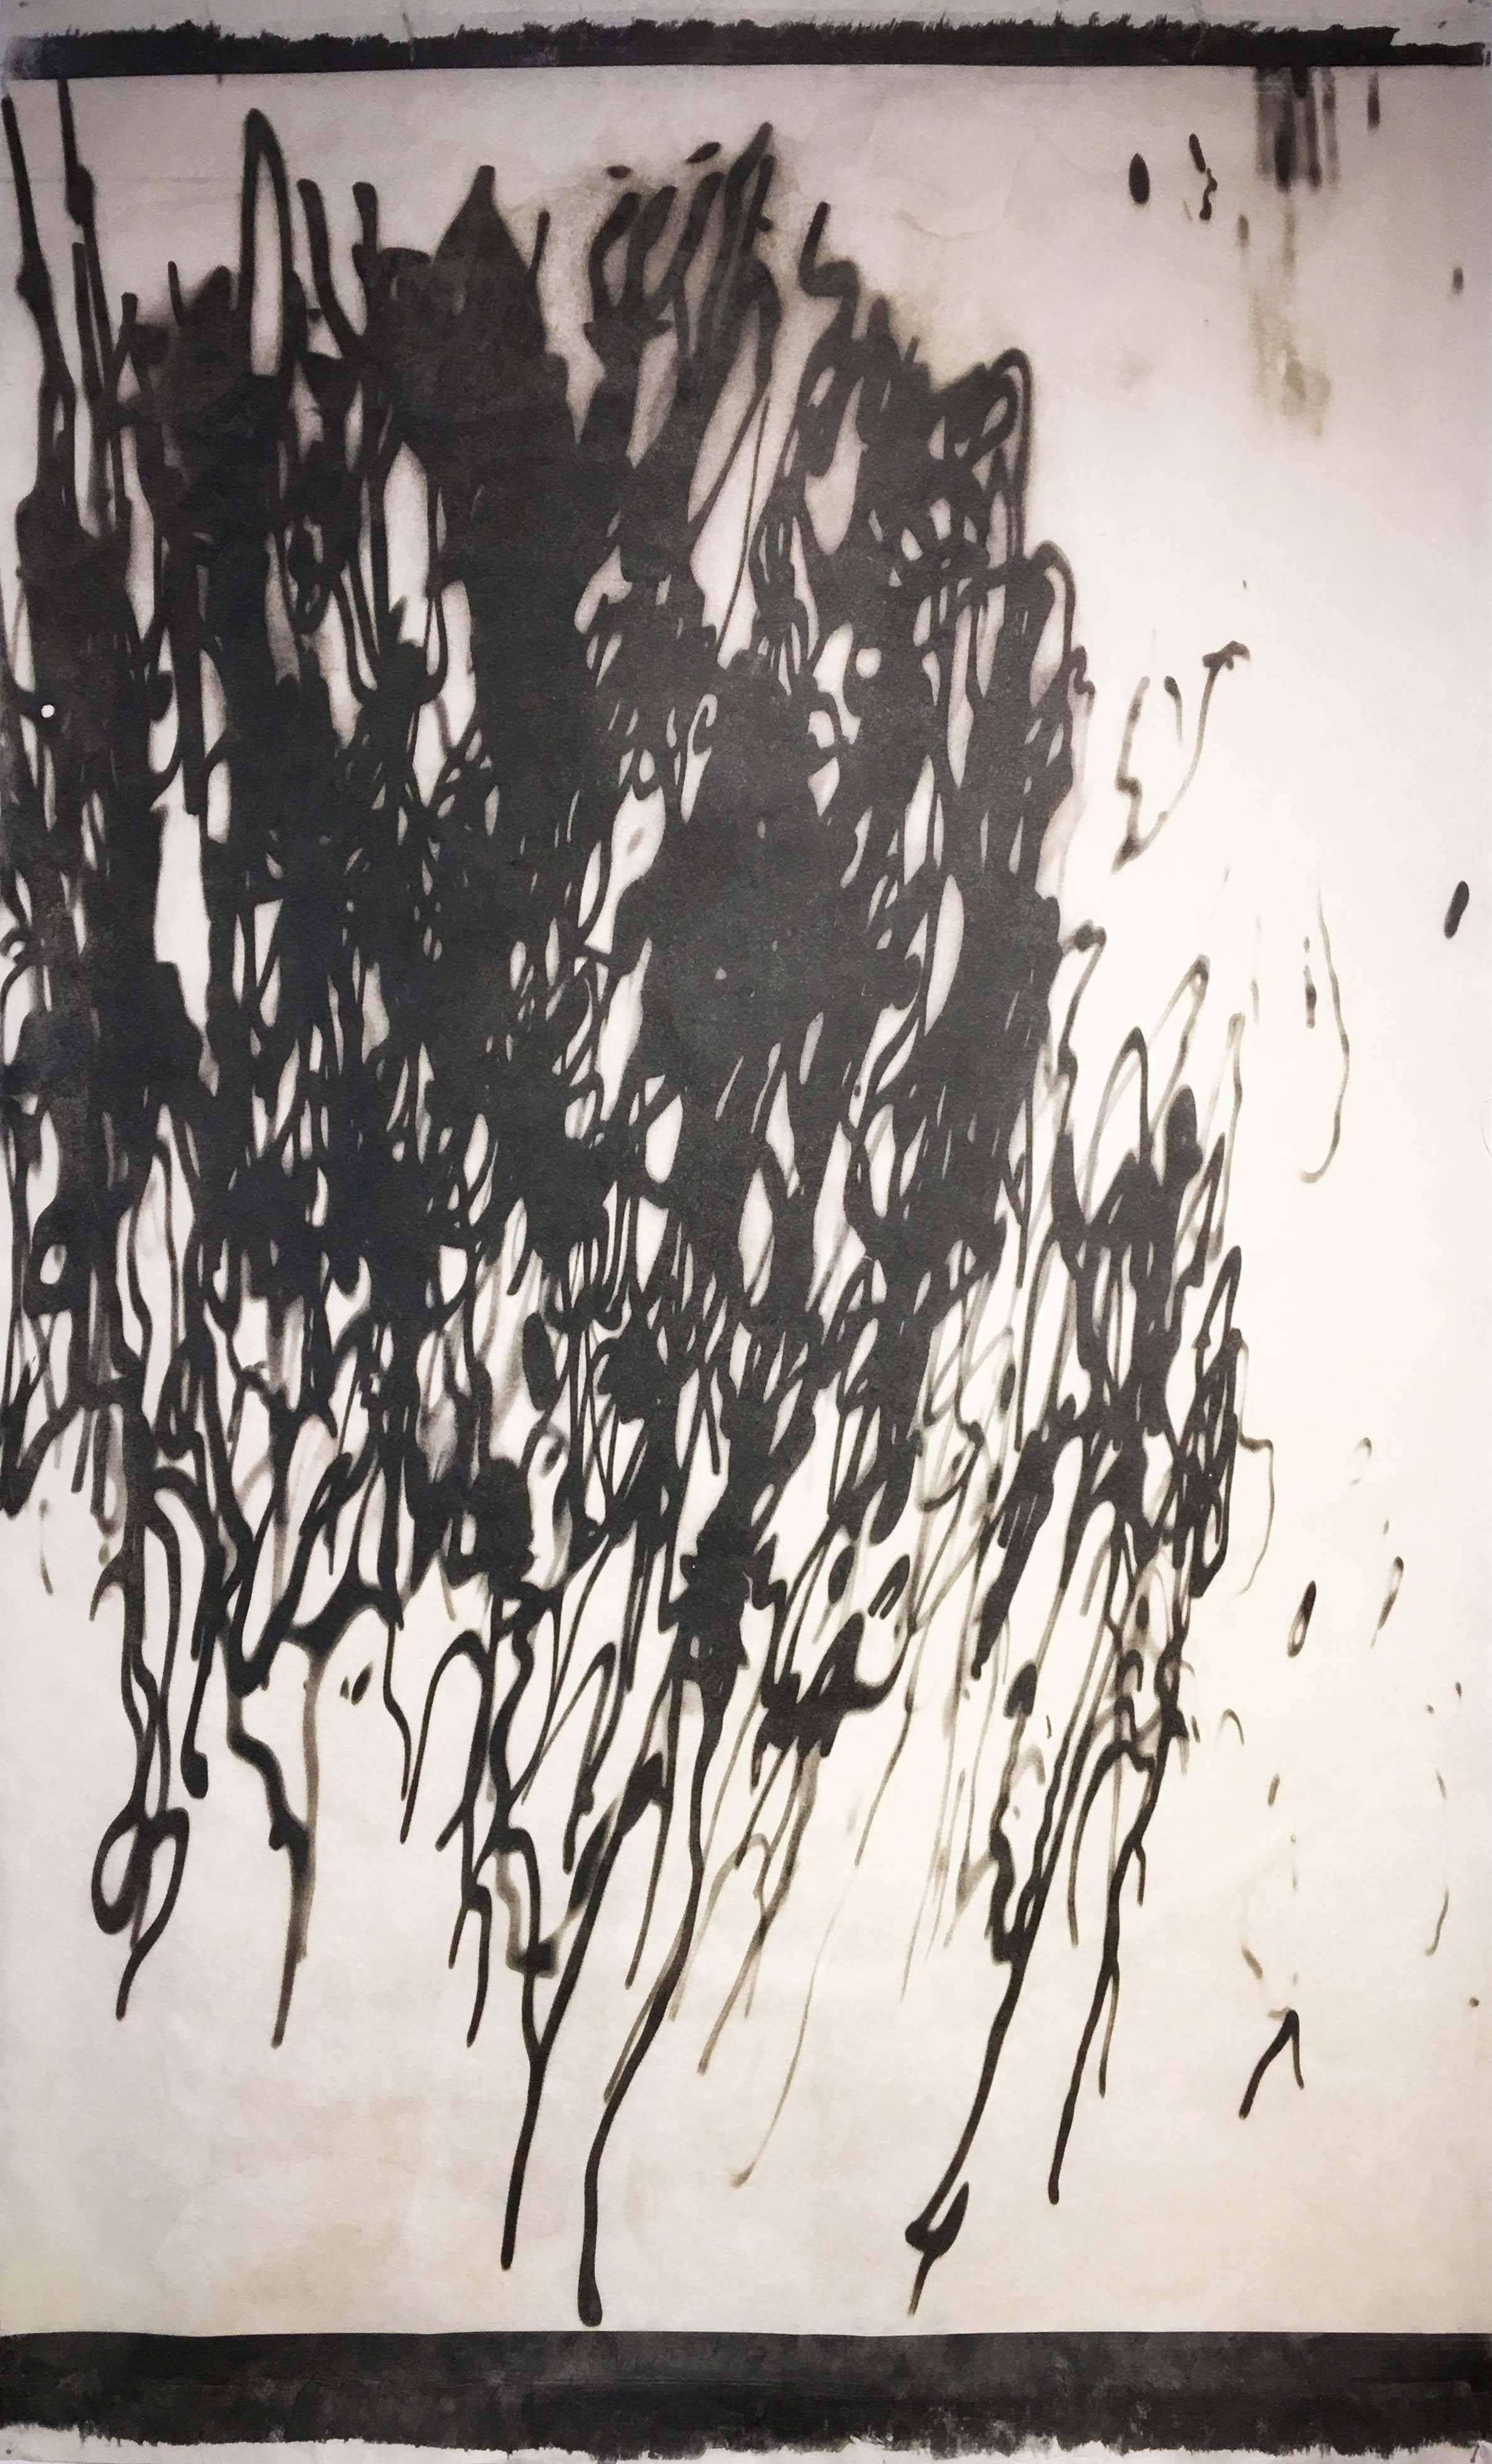 Bruna Stude Abstract Photograph - Squid Ink on Kozo No. 1